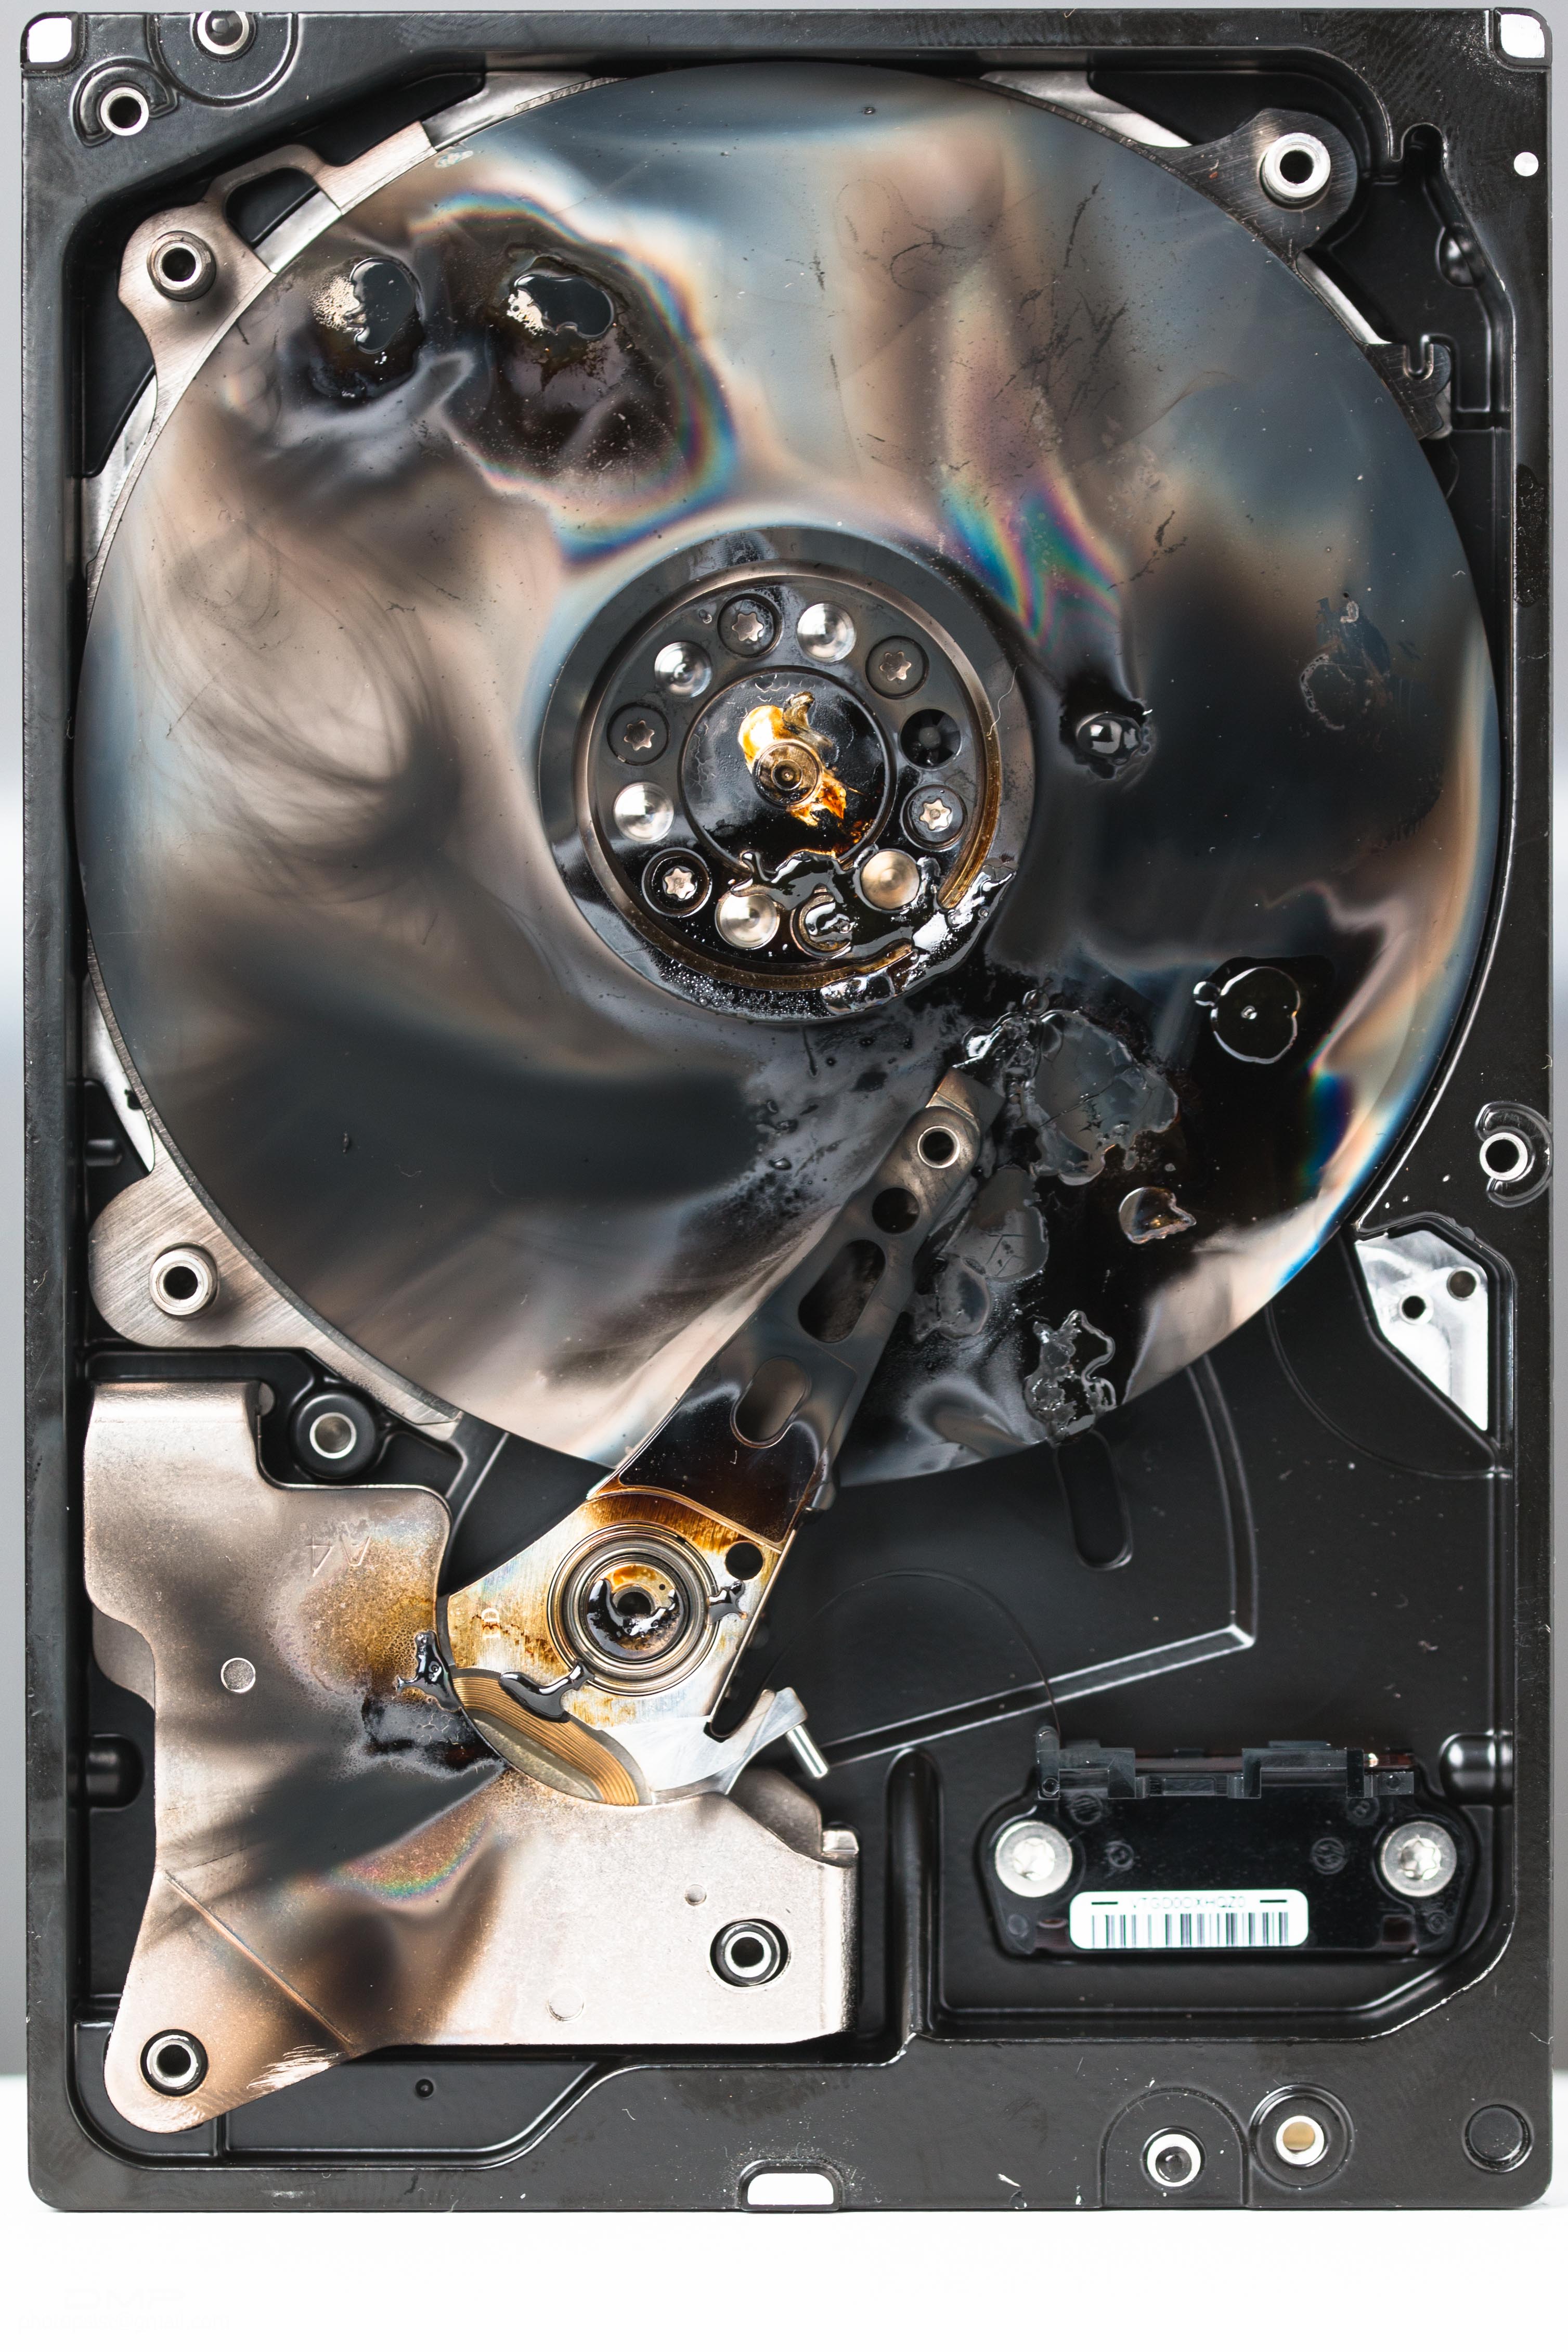 How to destroy a hard drive so that the data cannot be accessed any longer